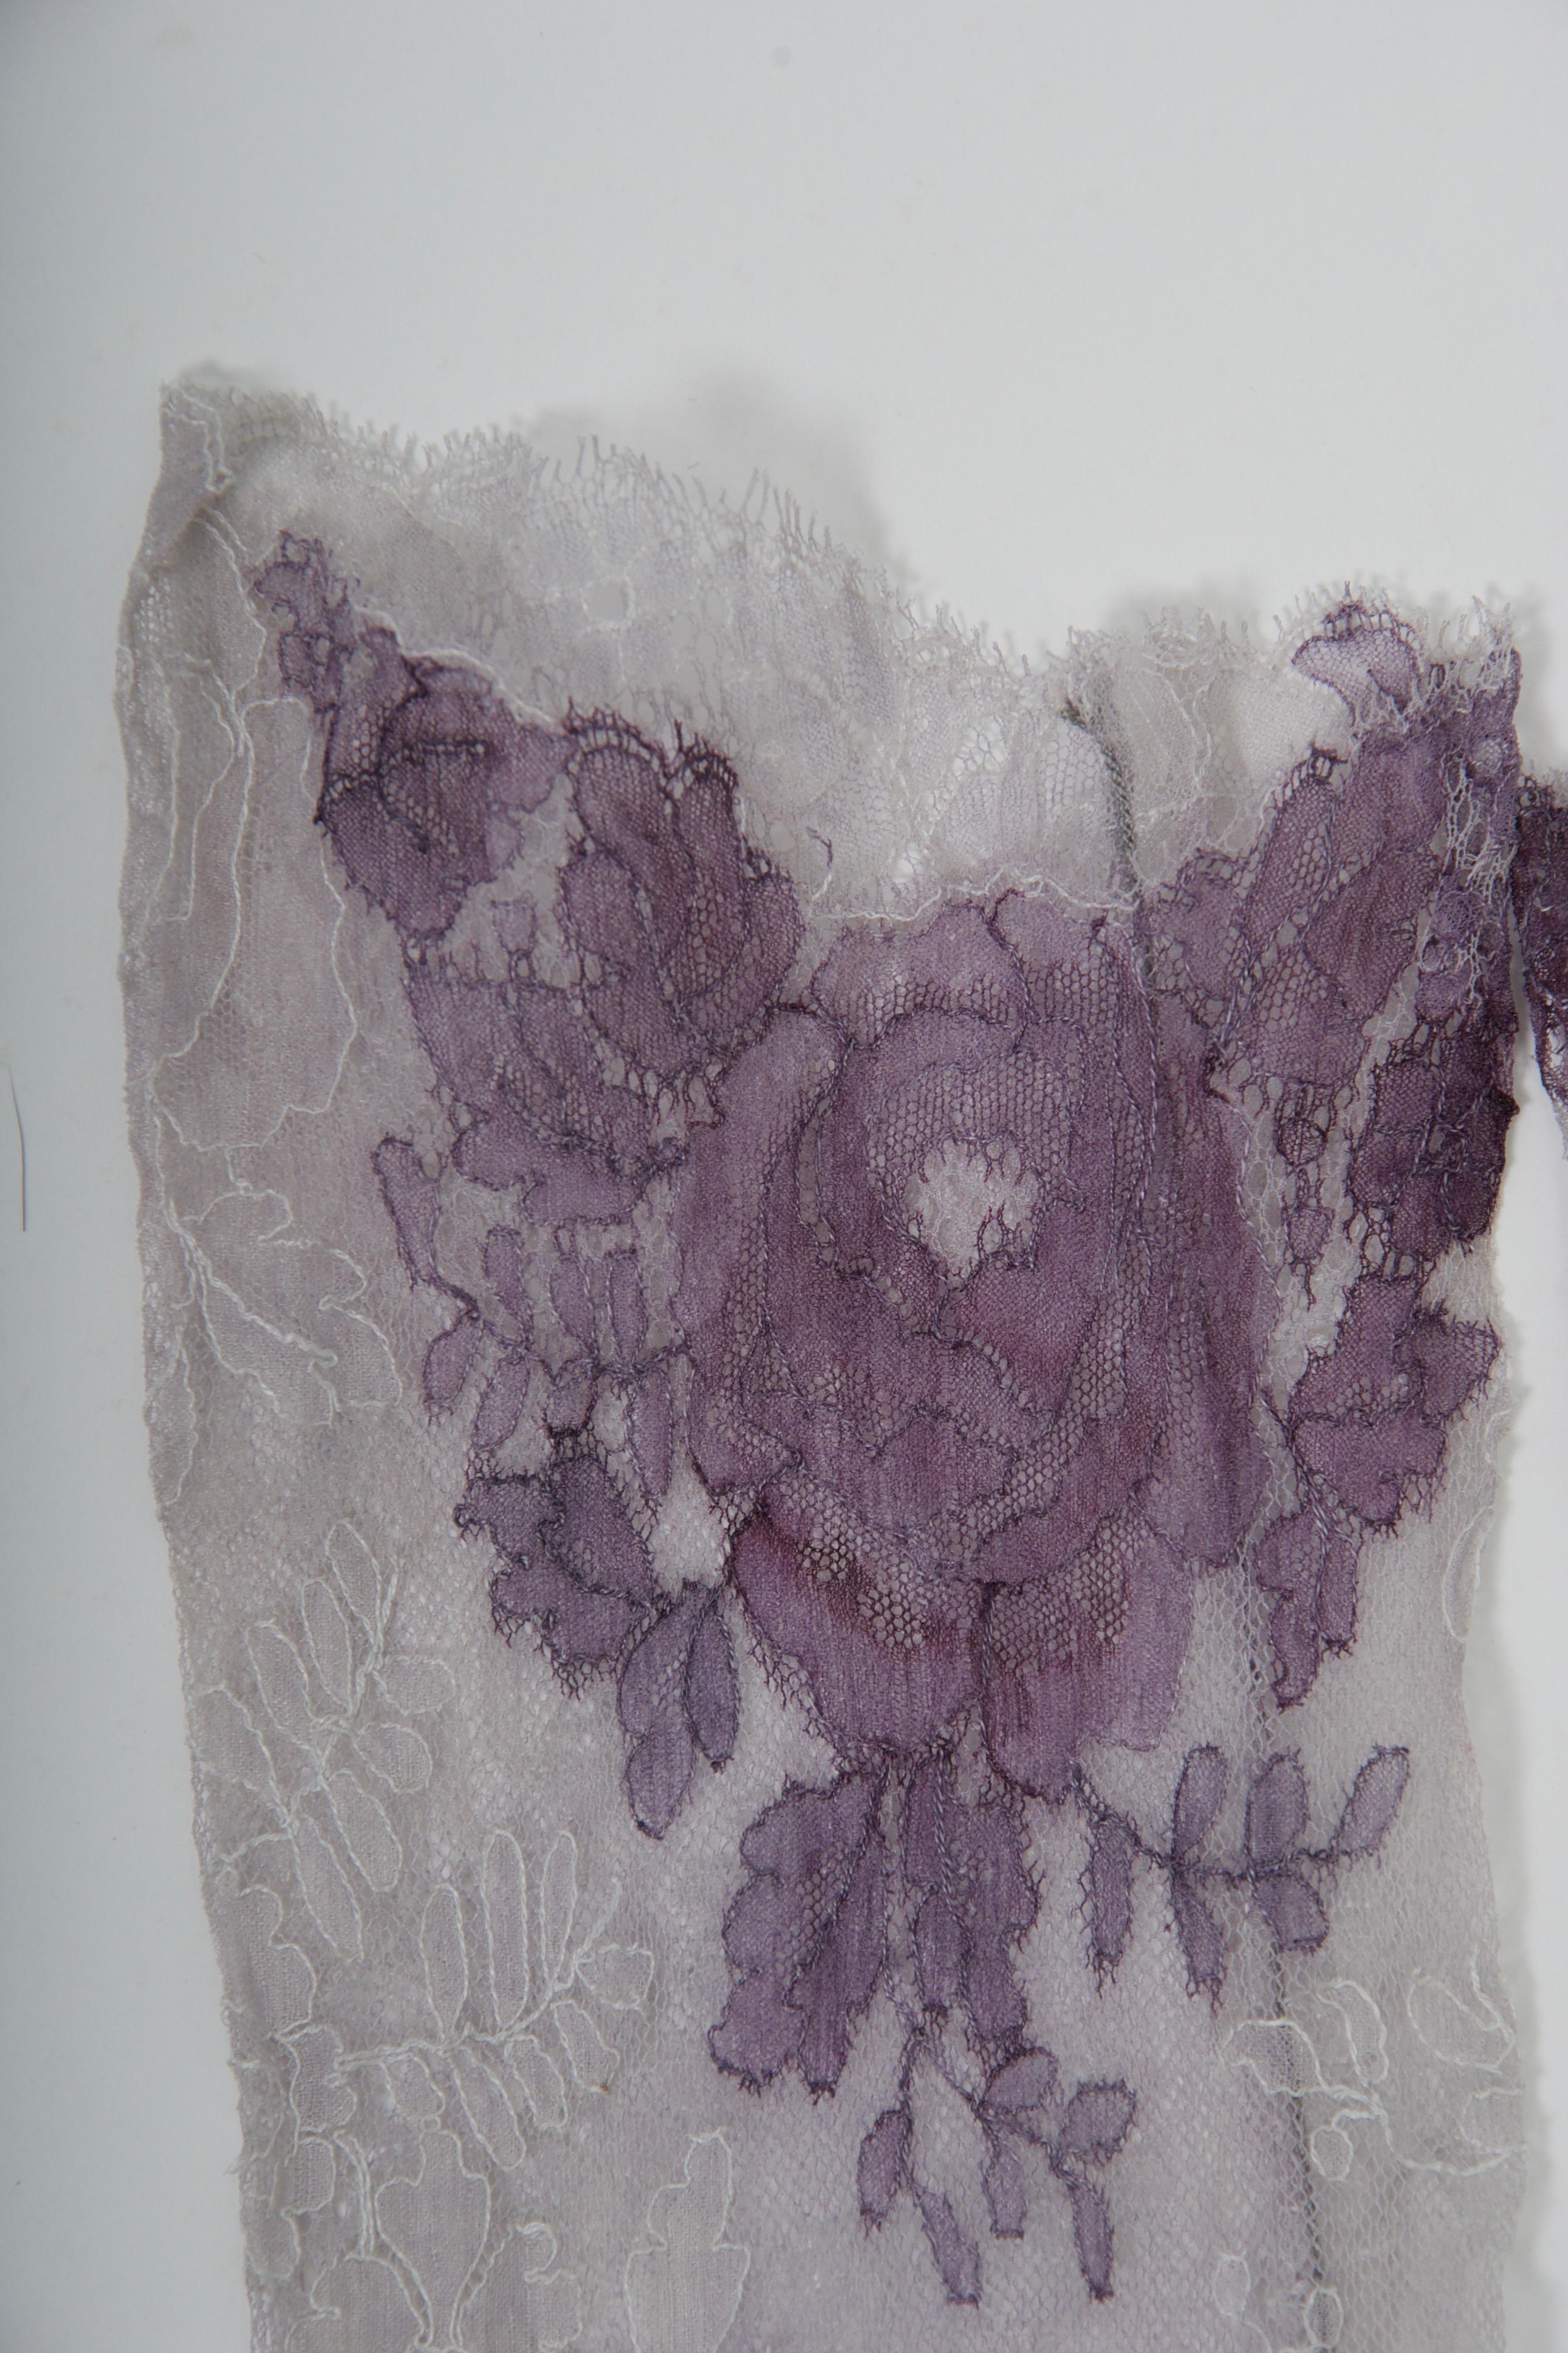 A unique and fabulous find, these vintage lace gloves in pale gray are overlayed with purple lace floral appliqués. Over-the-elbow length and finished with edge conforming to lace pattern. Fits medium hand, approximately size 7-7 1/2 and fabric has